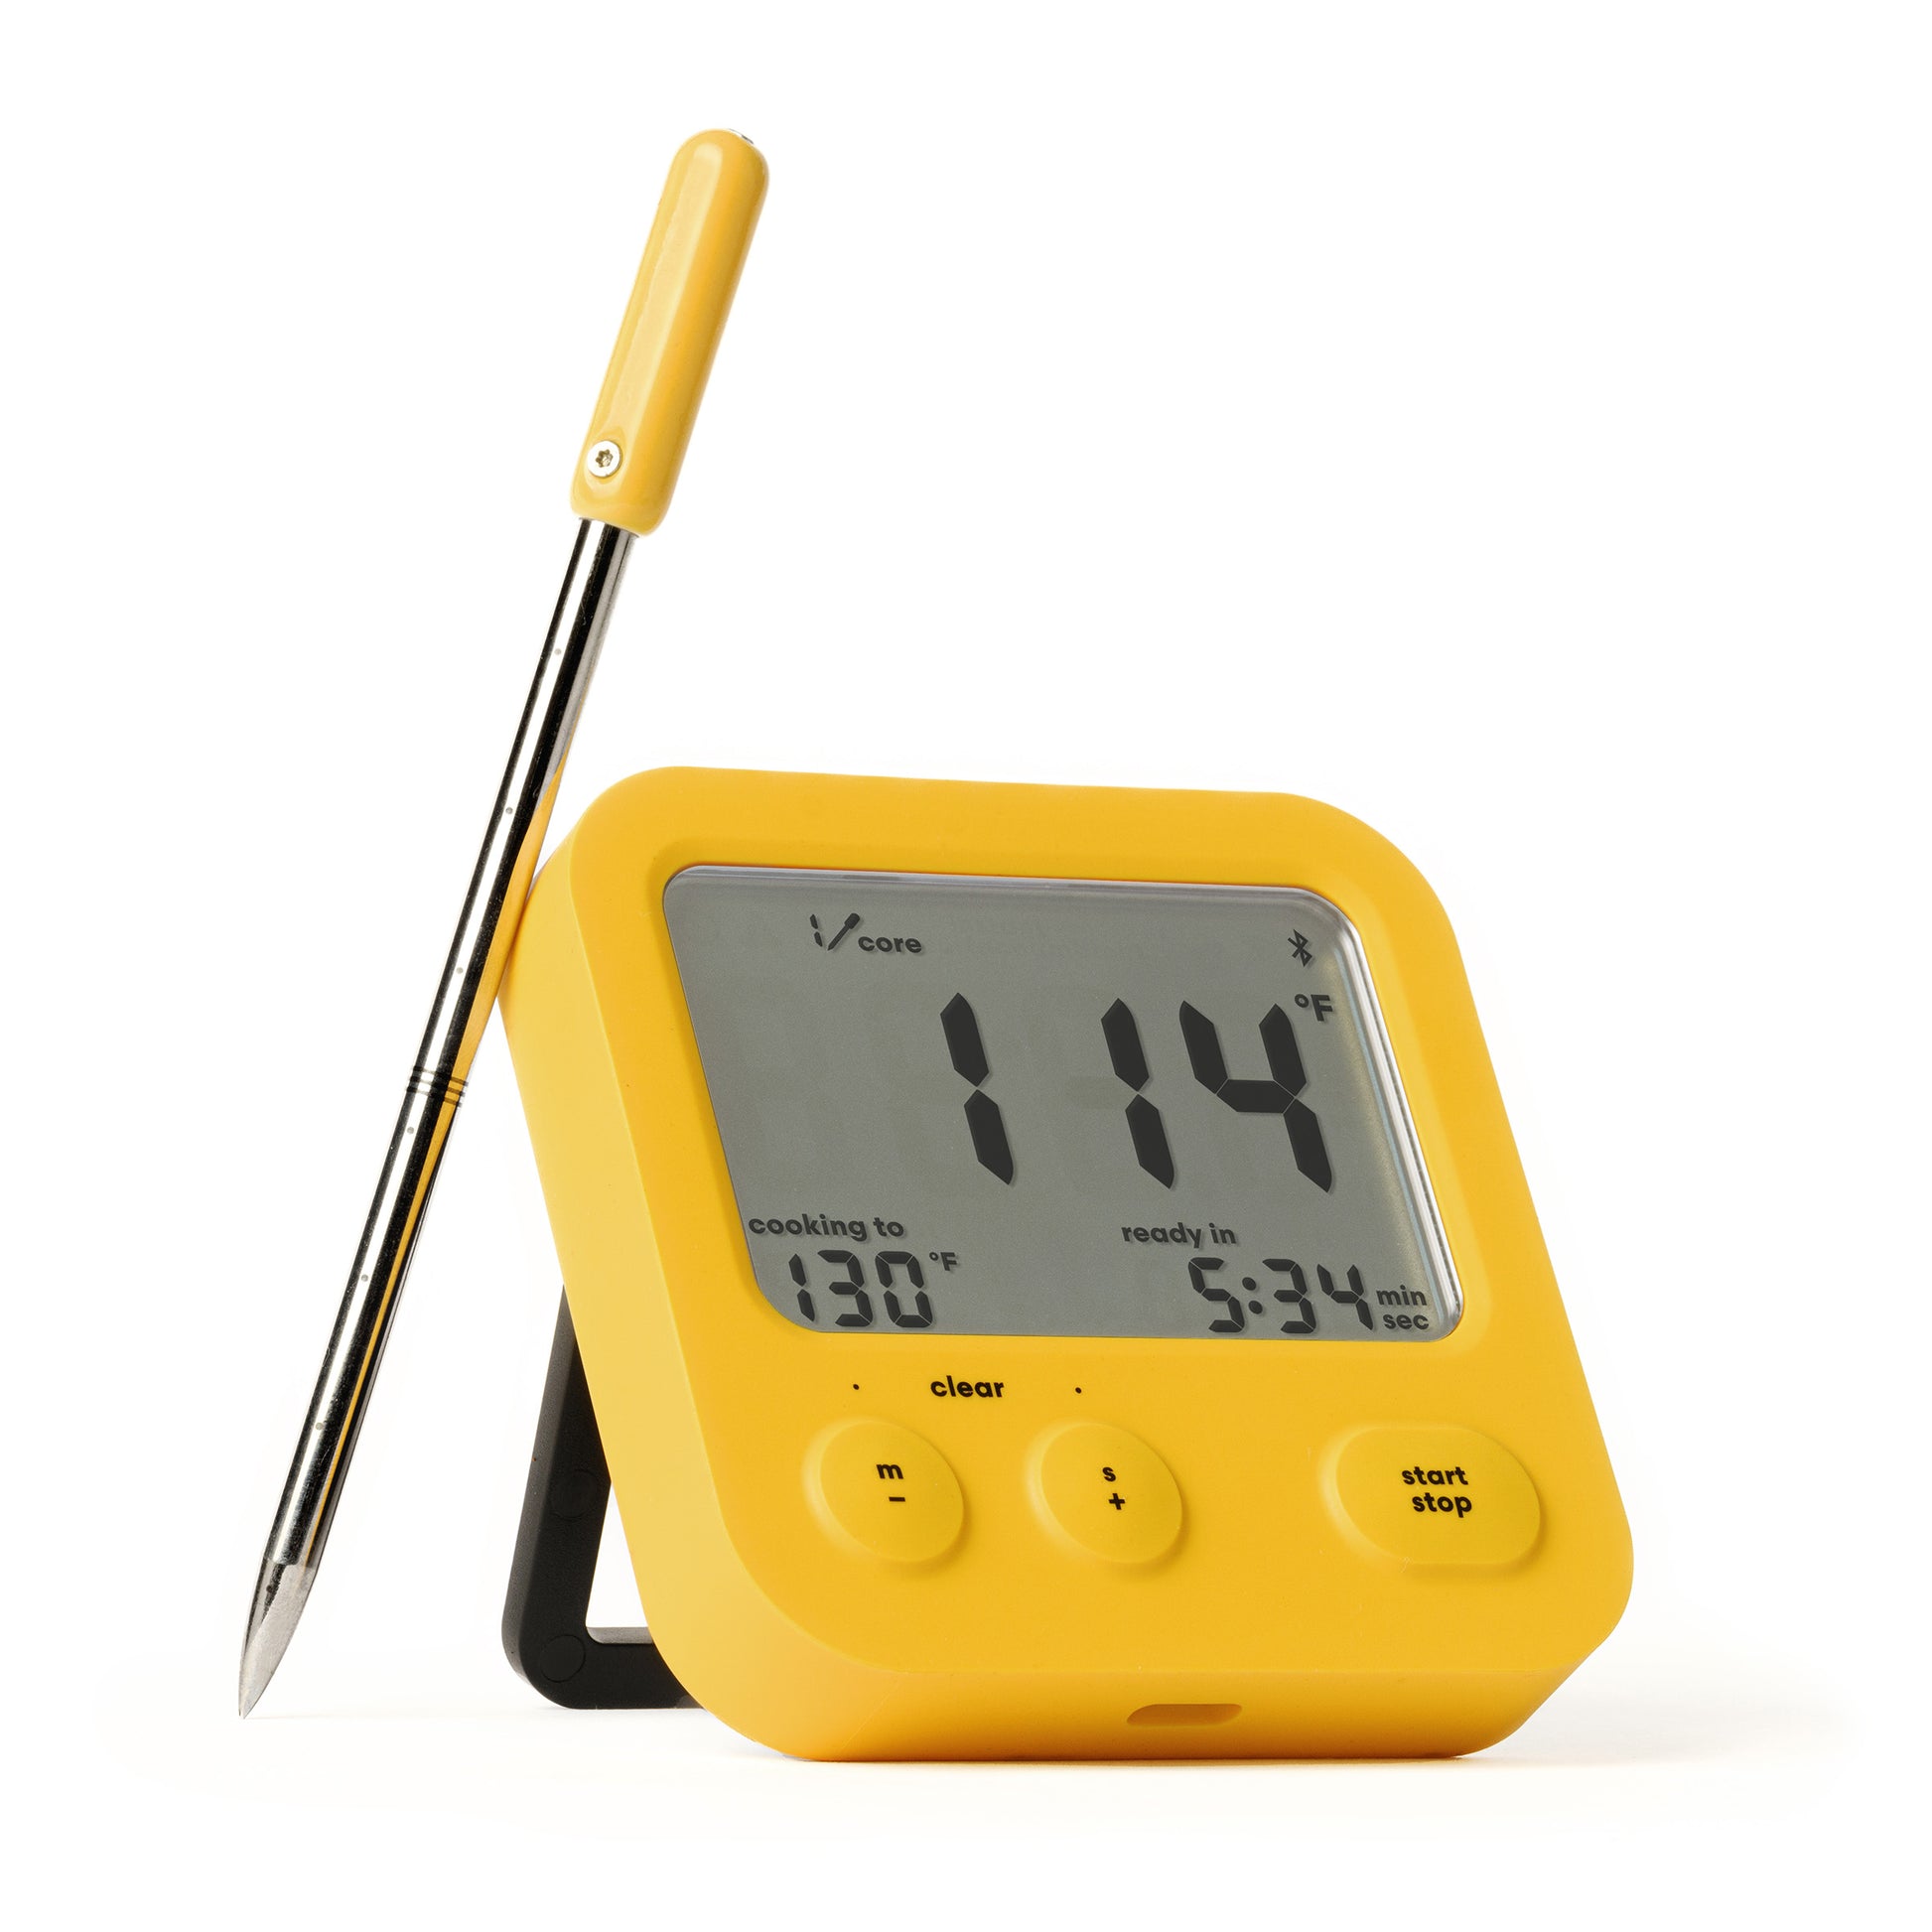 This Perfect-Meat-Every-Time Thermometer Is 26 Percent Off